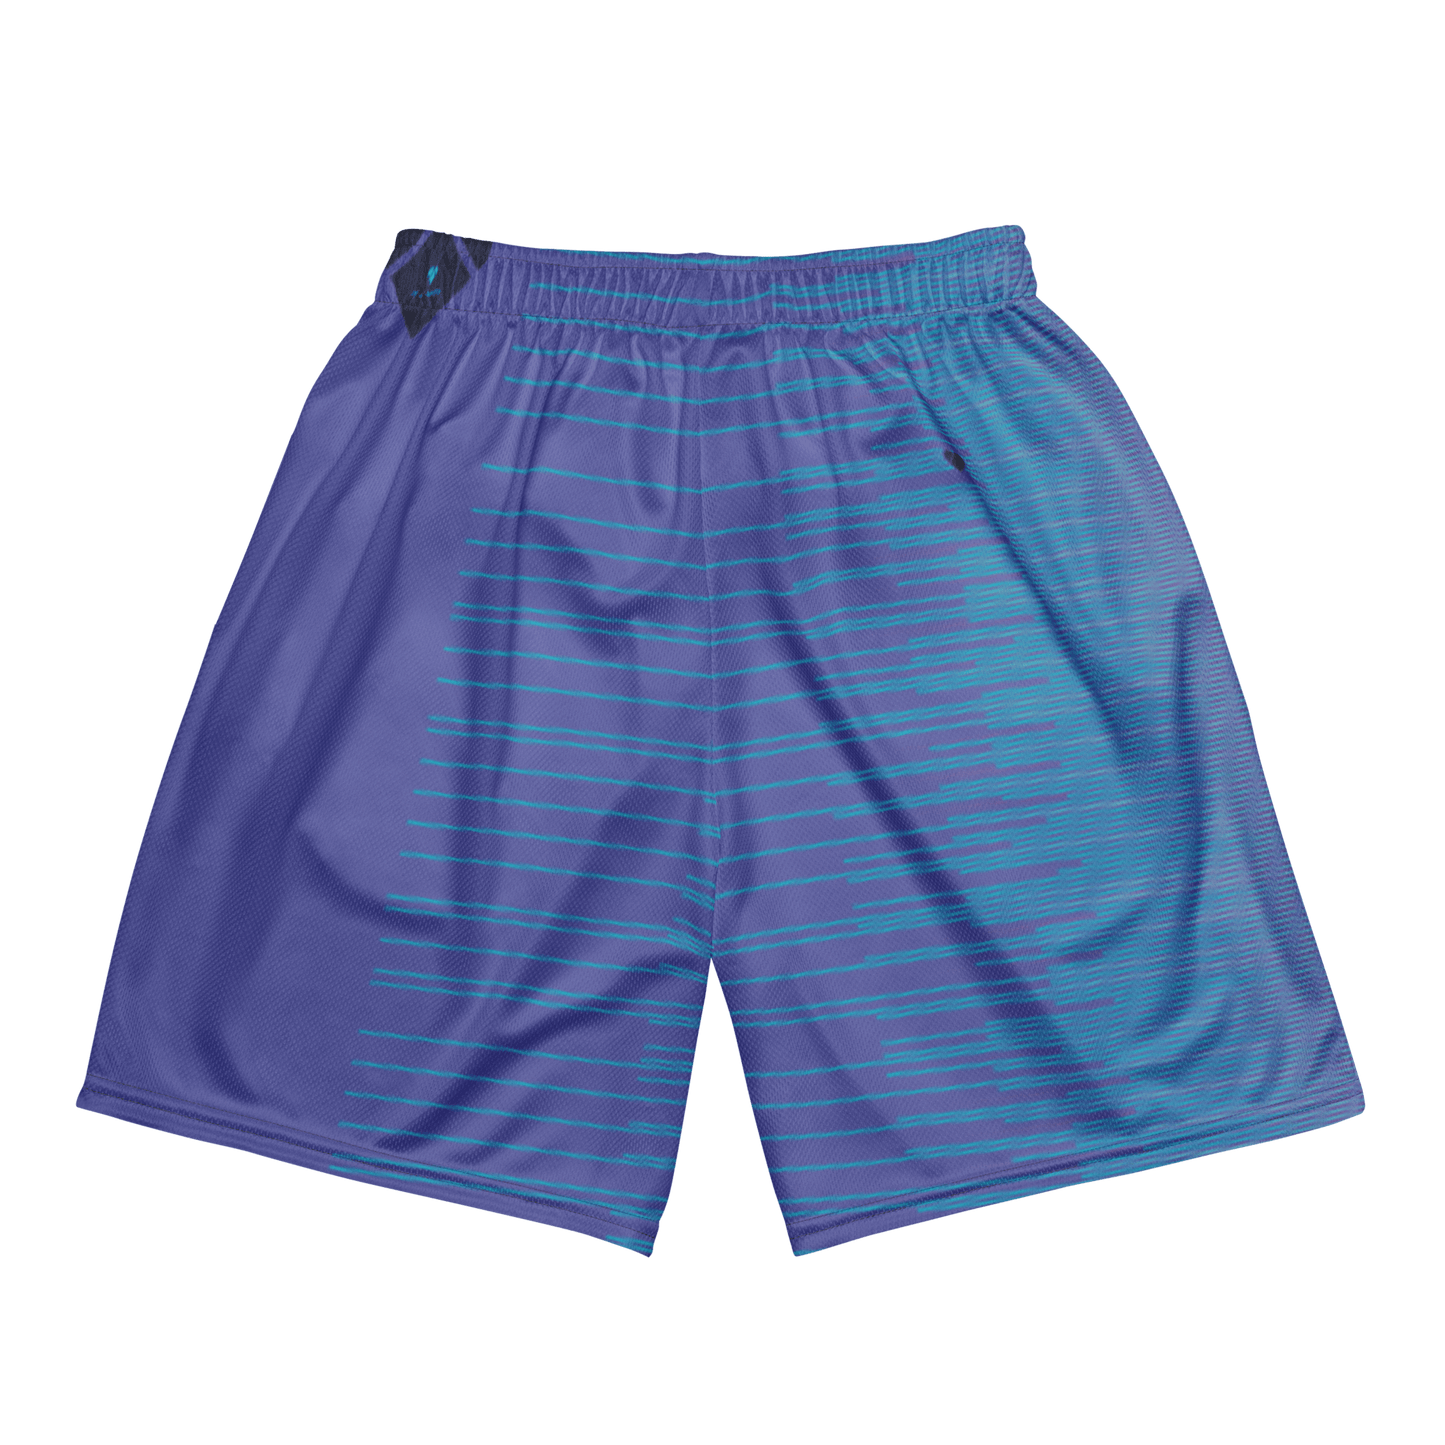 Turquoise gradient stripes on Periwinkle Stripes Dual Mesh Shorts